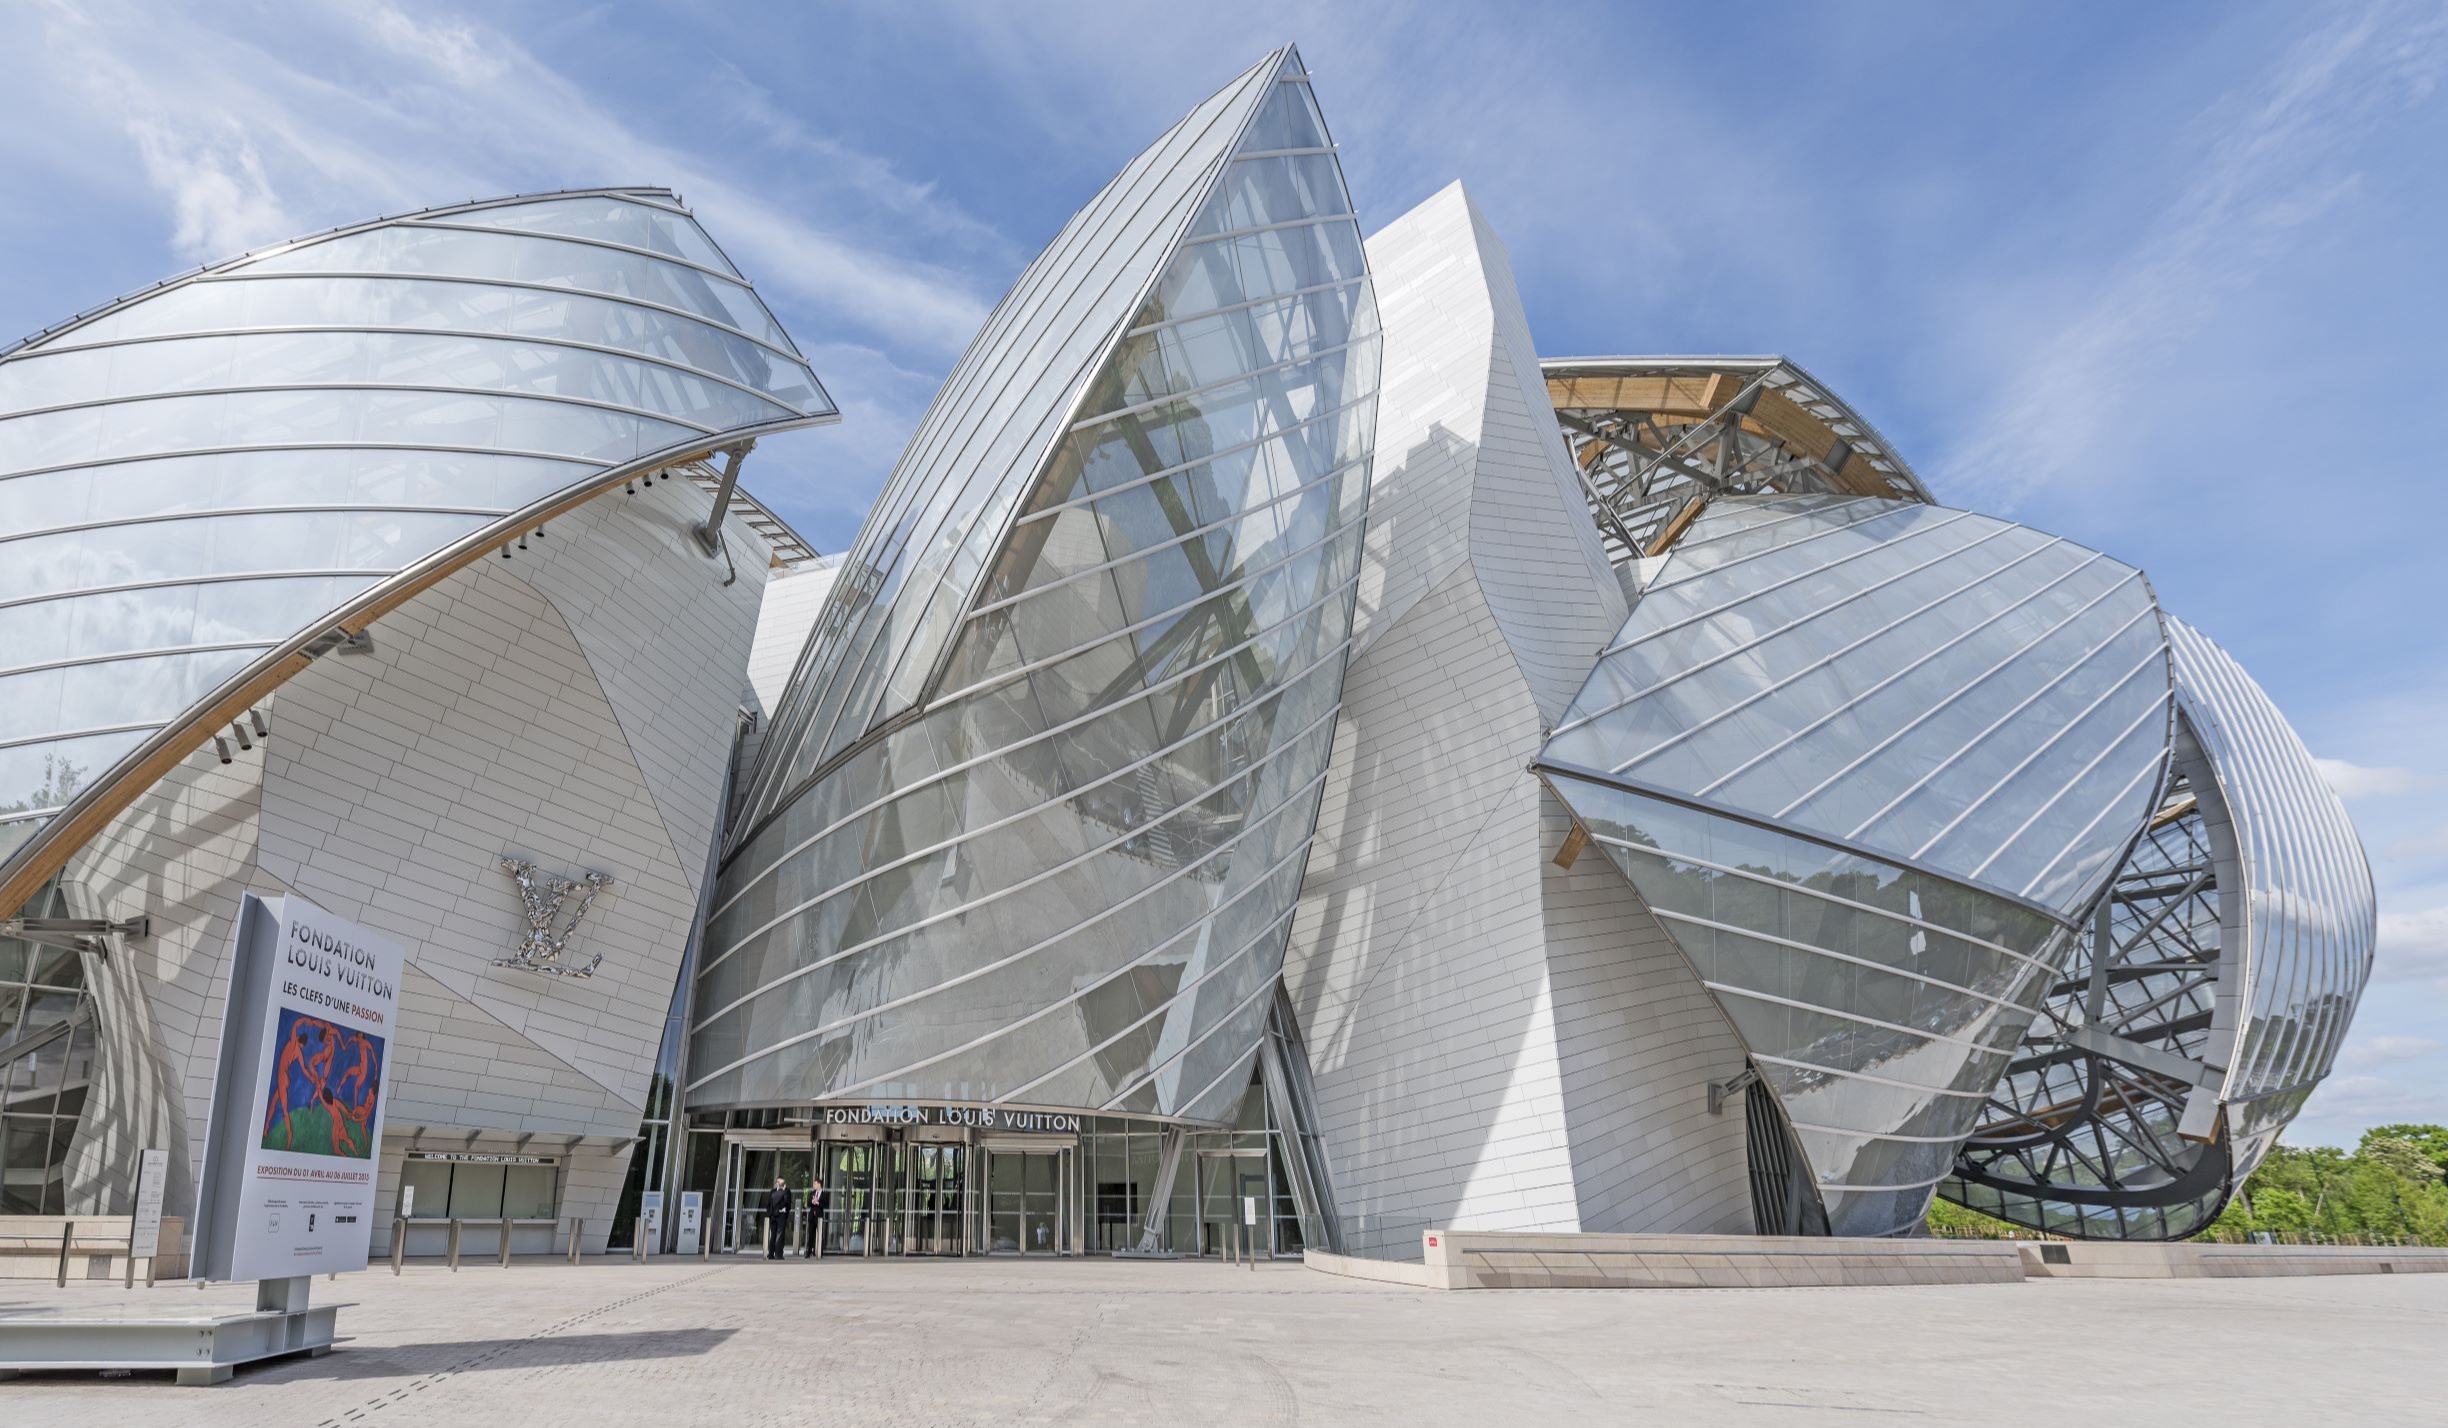 French Limestone & Sustainability Set the Stage for Louis Vuitton Foundation